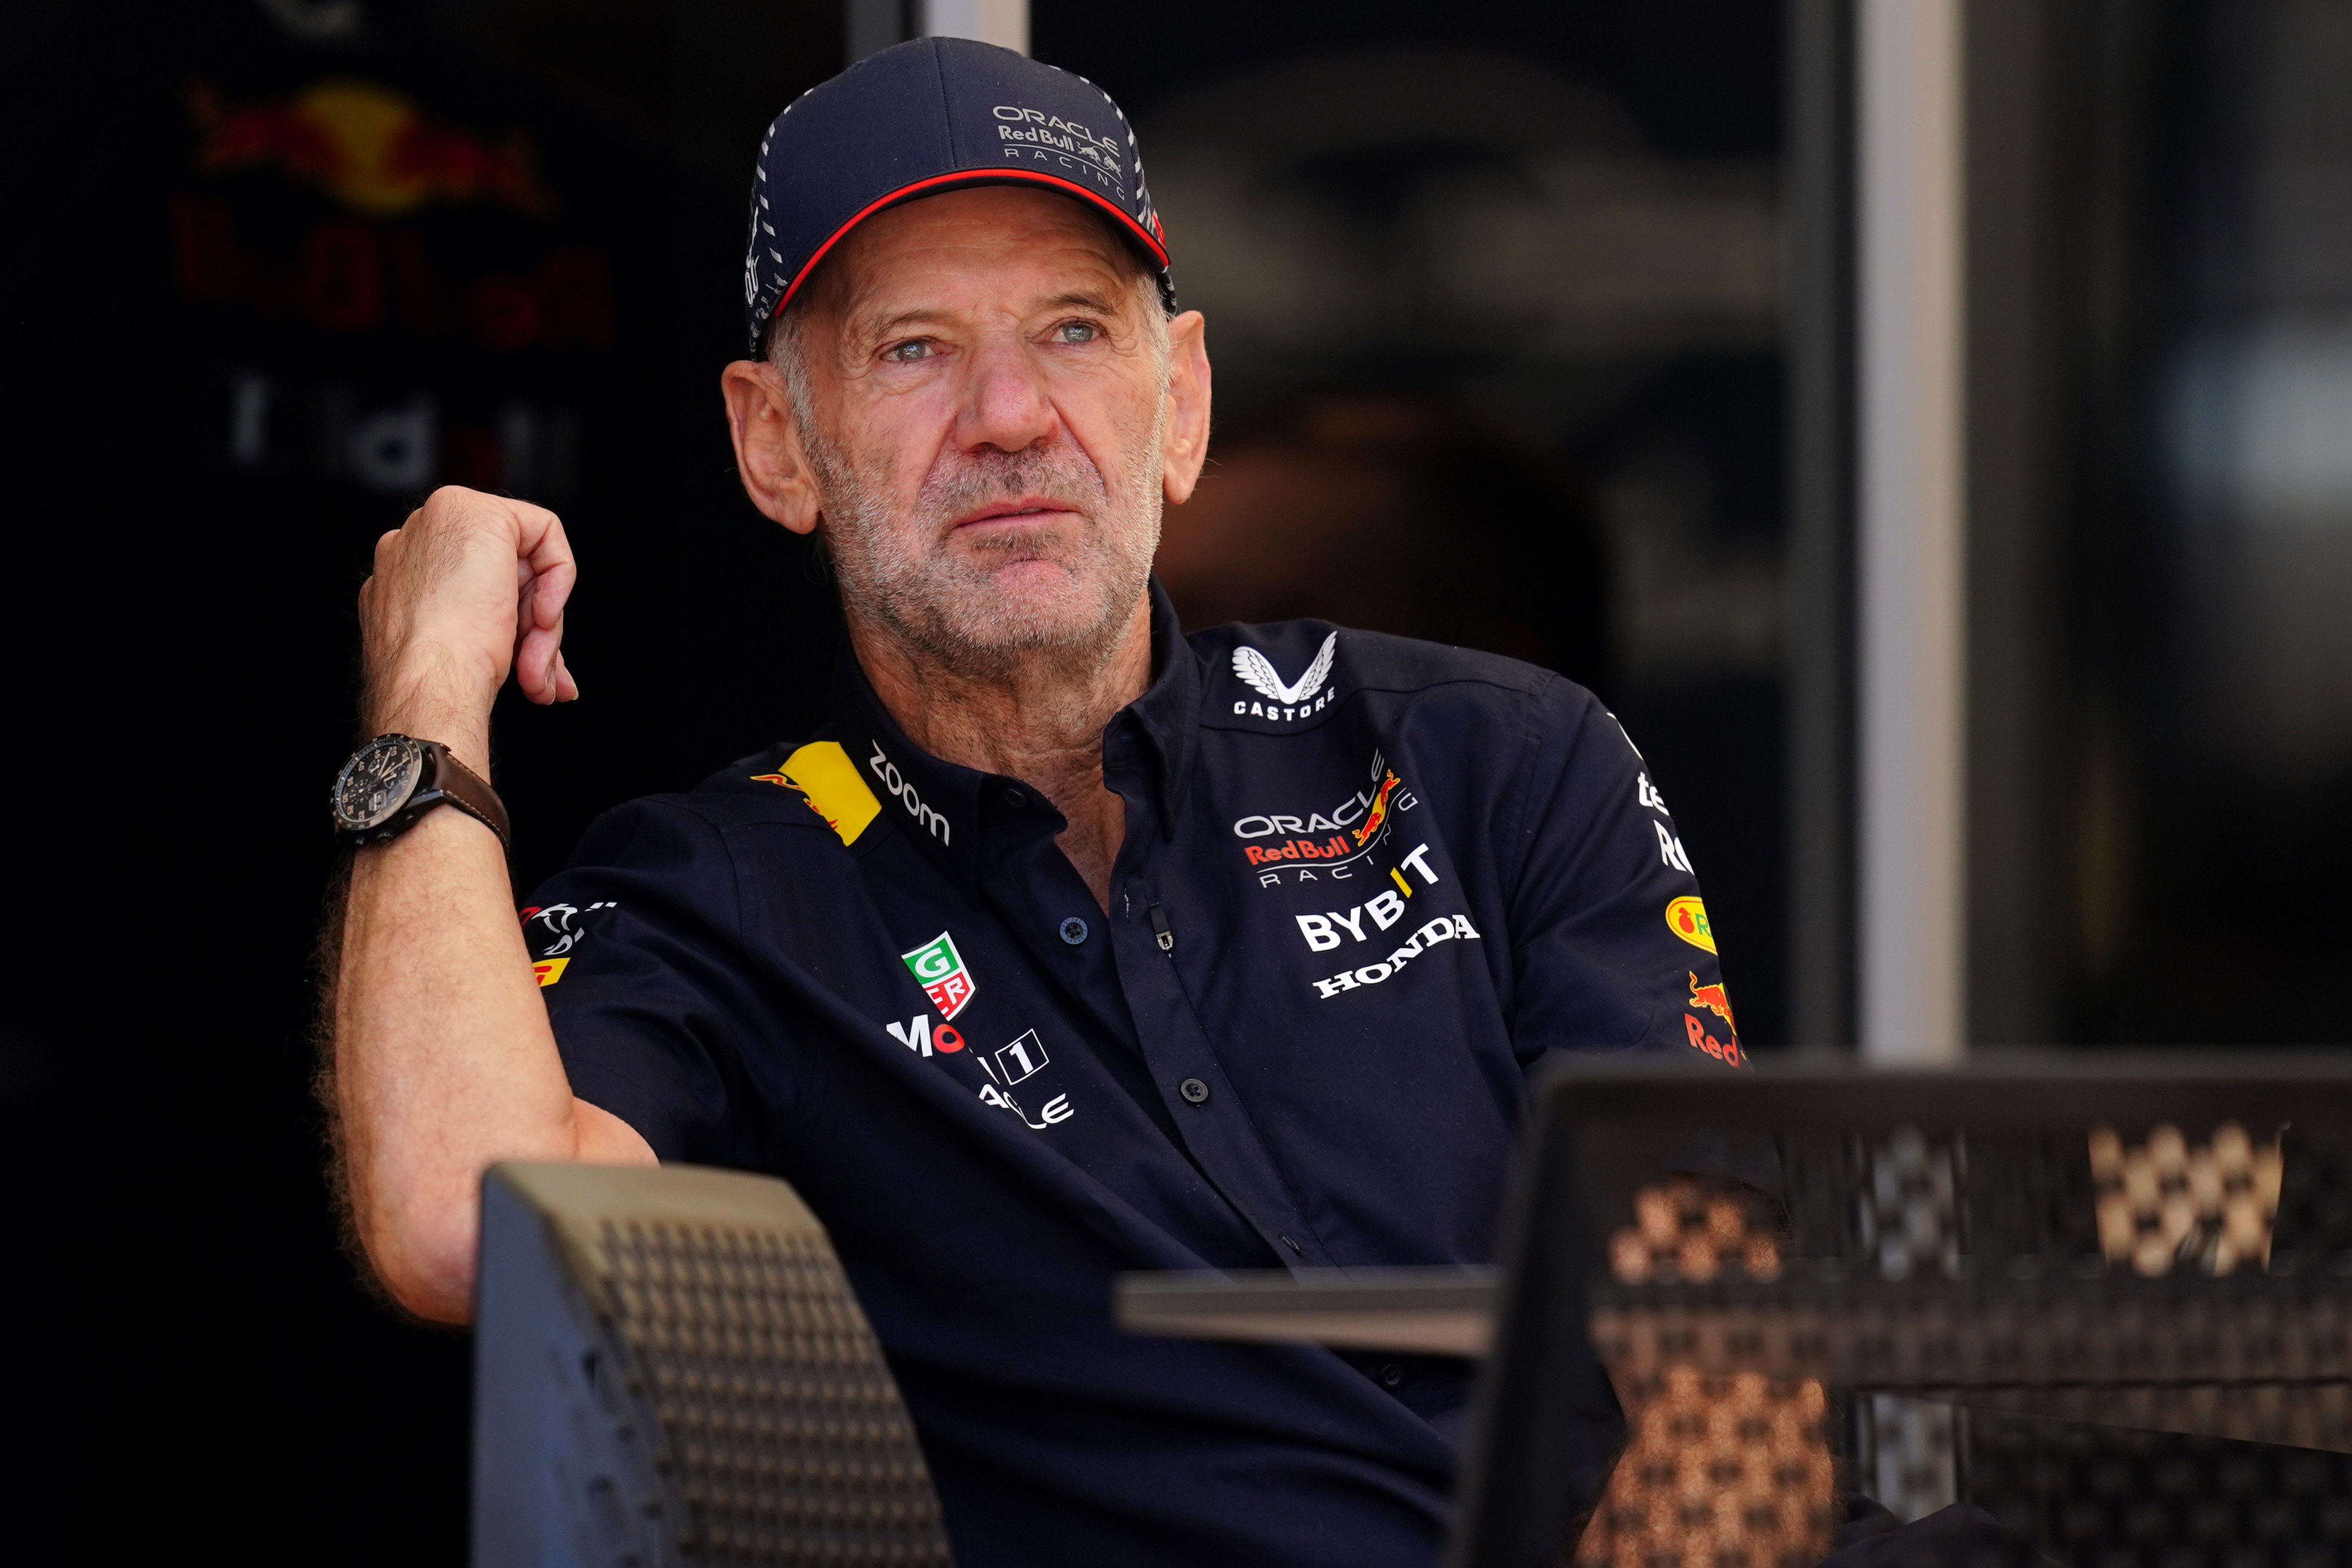 Newey’s desire to leave is very public thumbs-down for Horner’s Red Bull regime